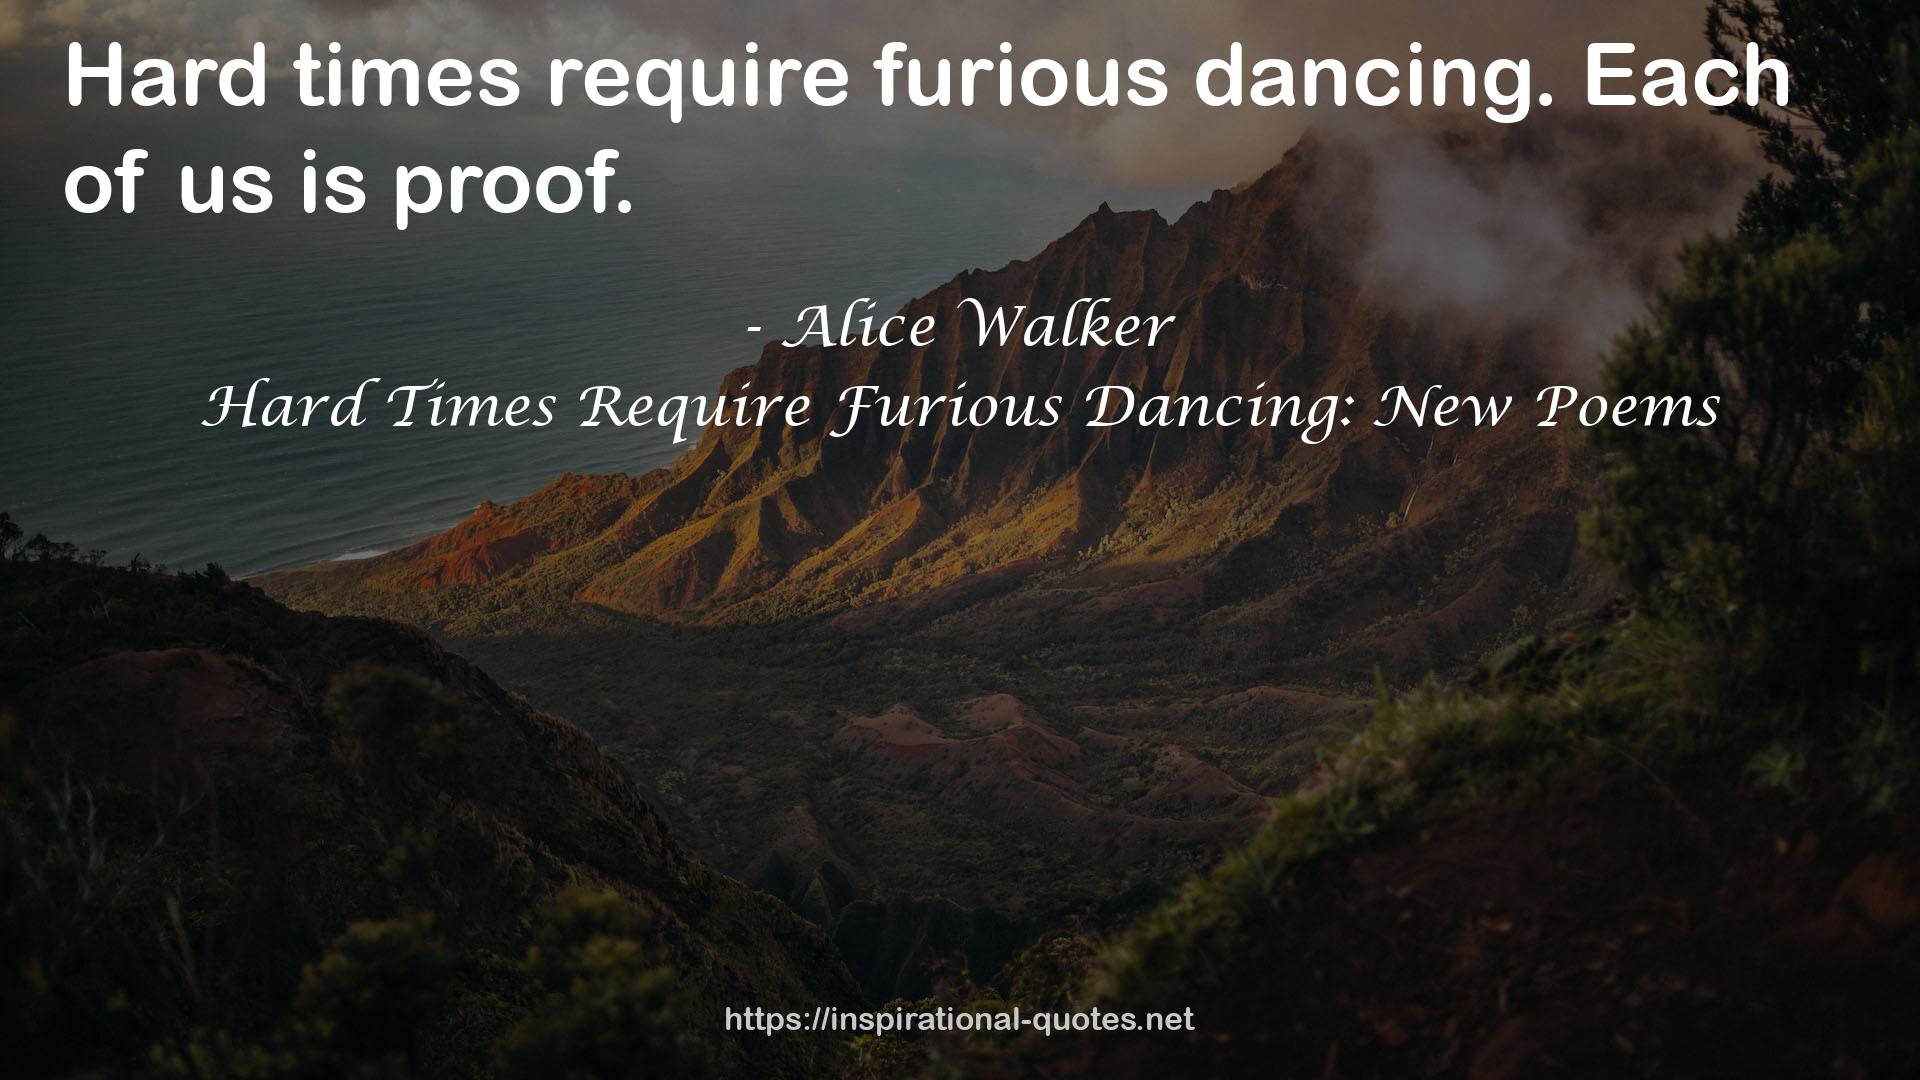 Hard Times Require Furious Dancing: New Poems QUOTES